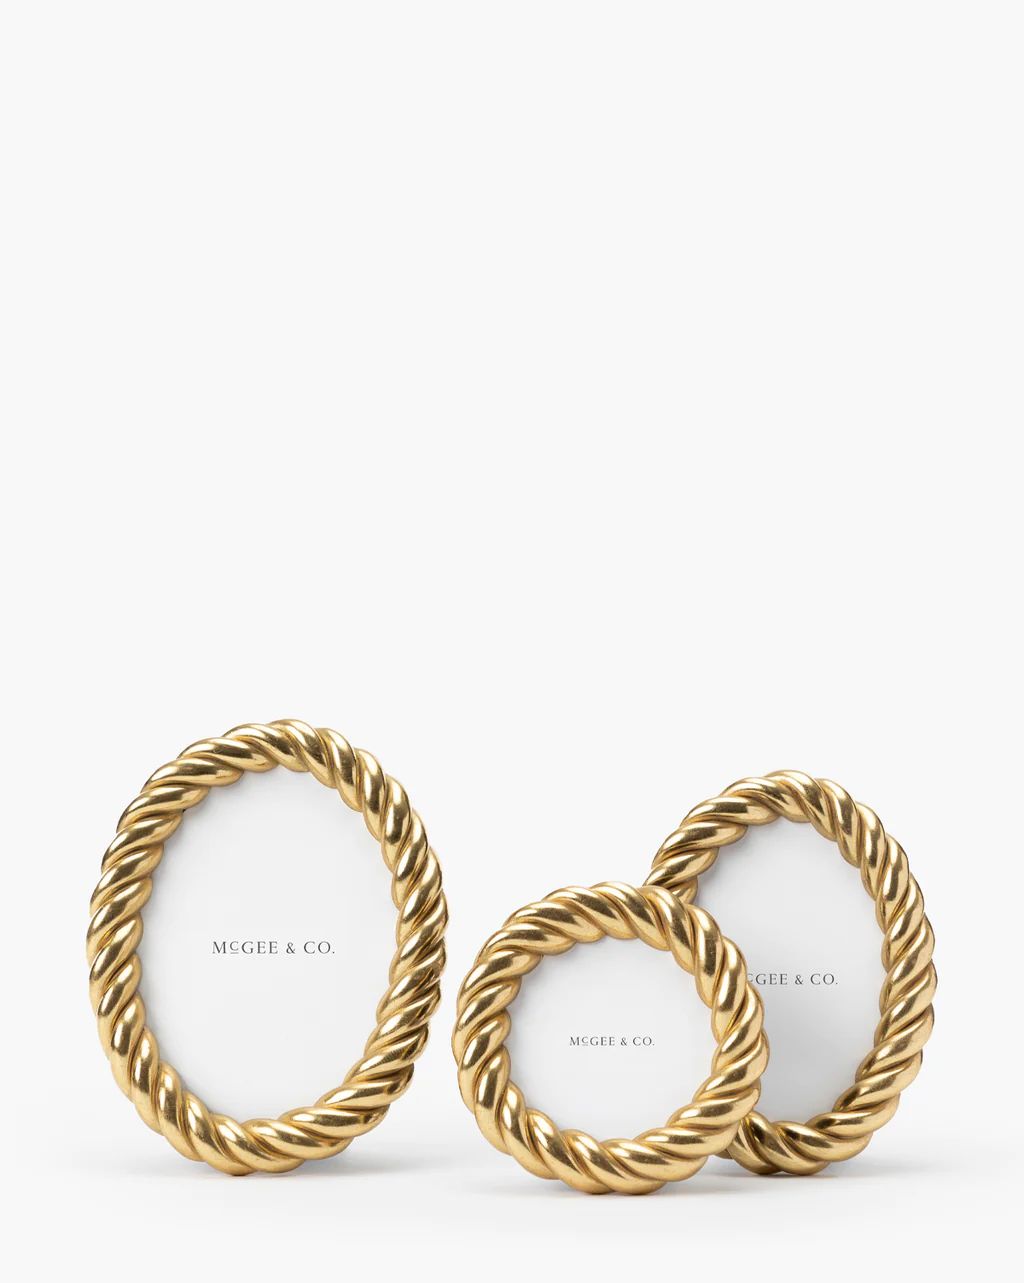 Gilded Rope Frame | McGee & Co. (US)